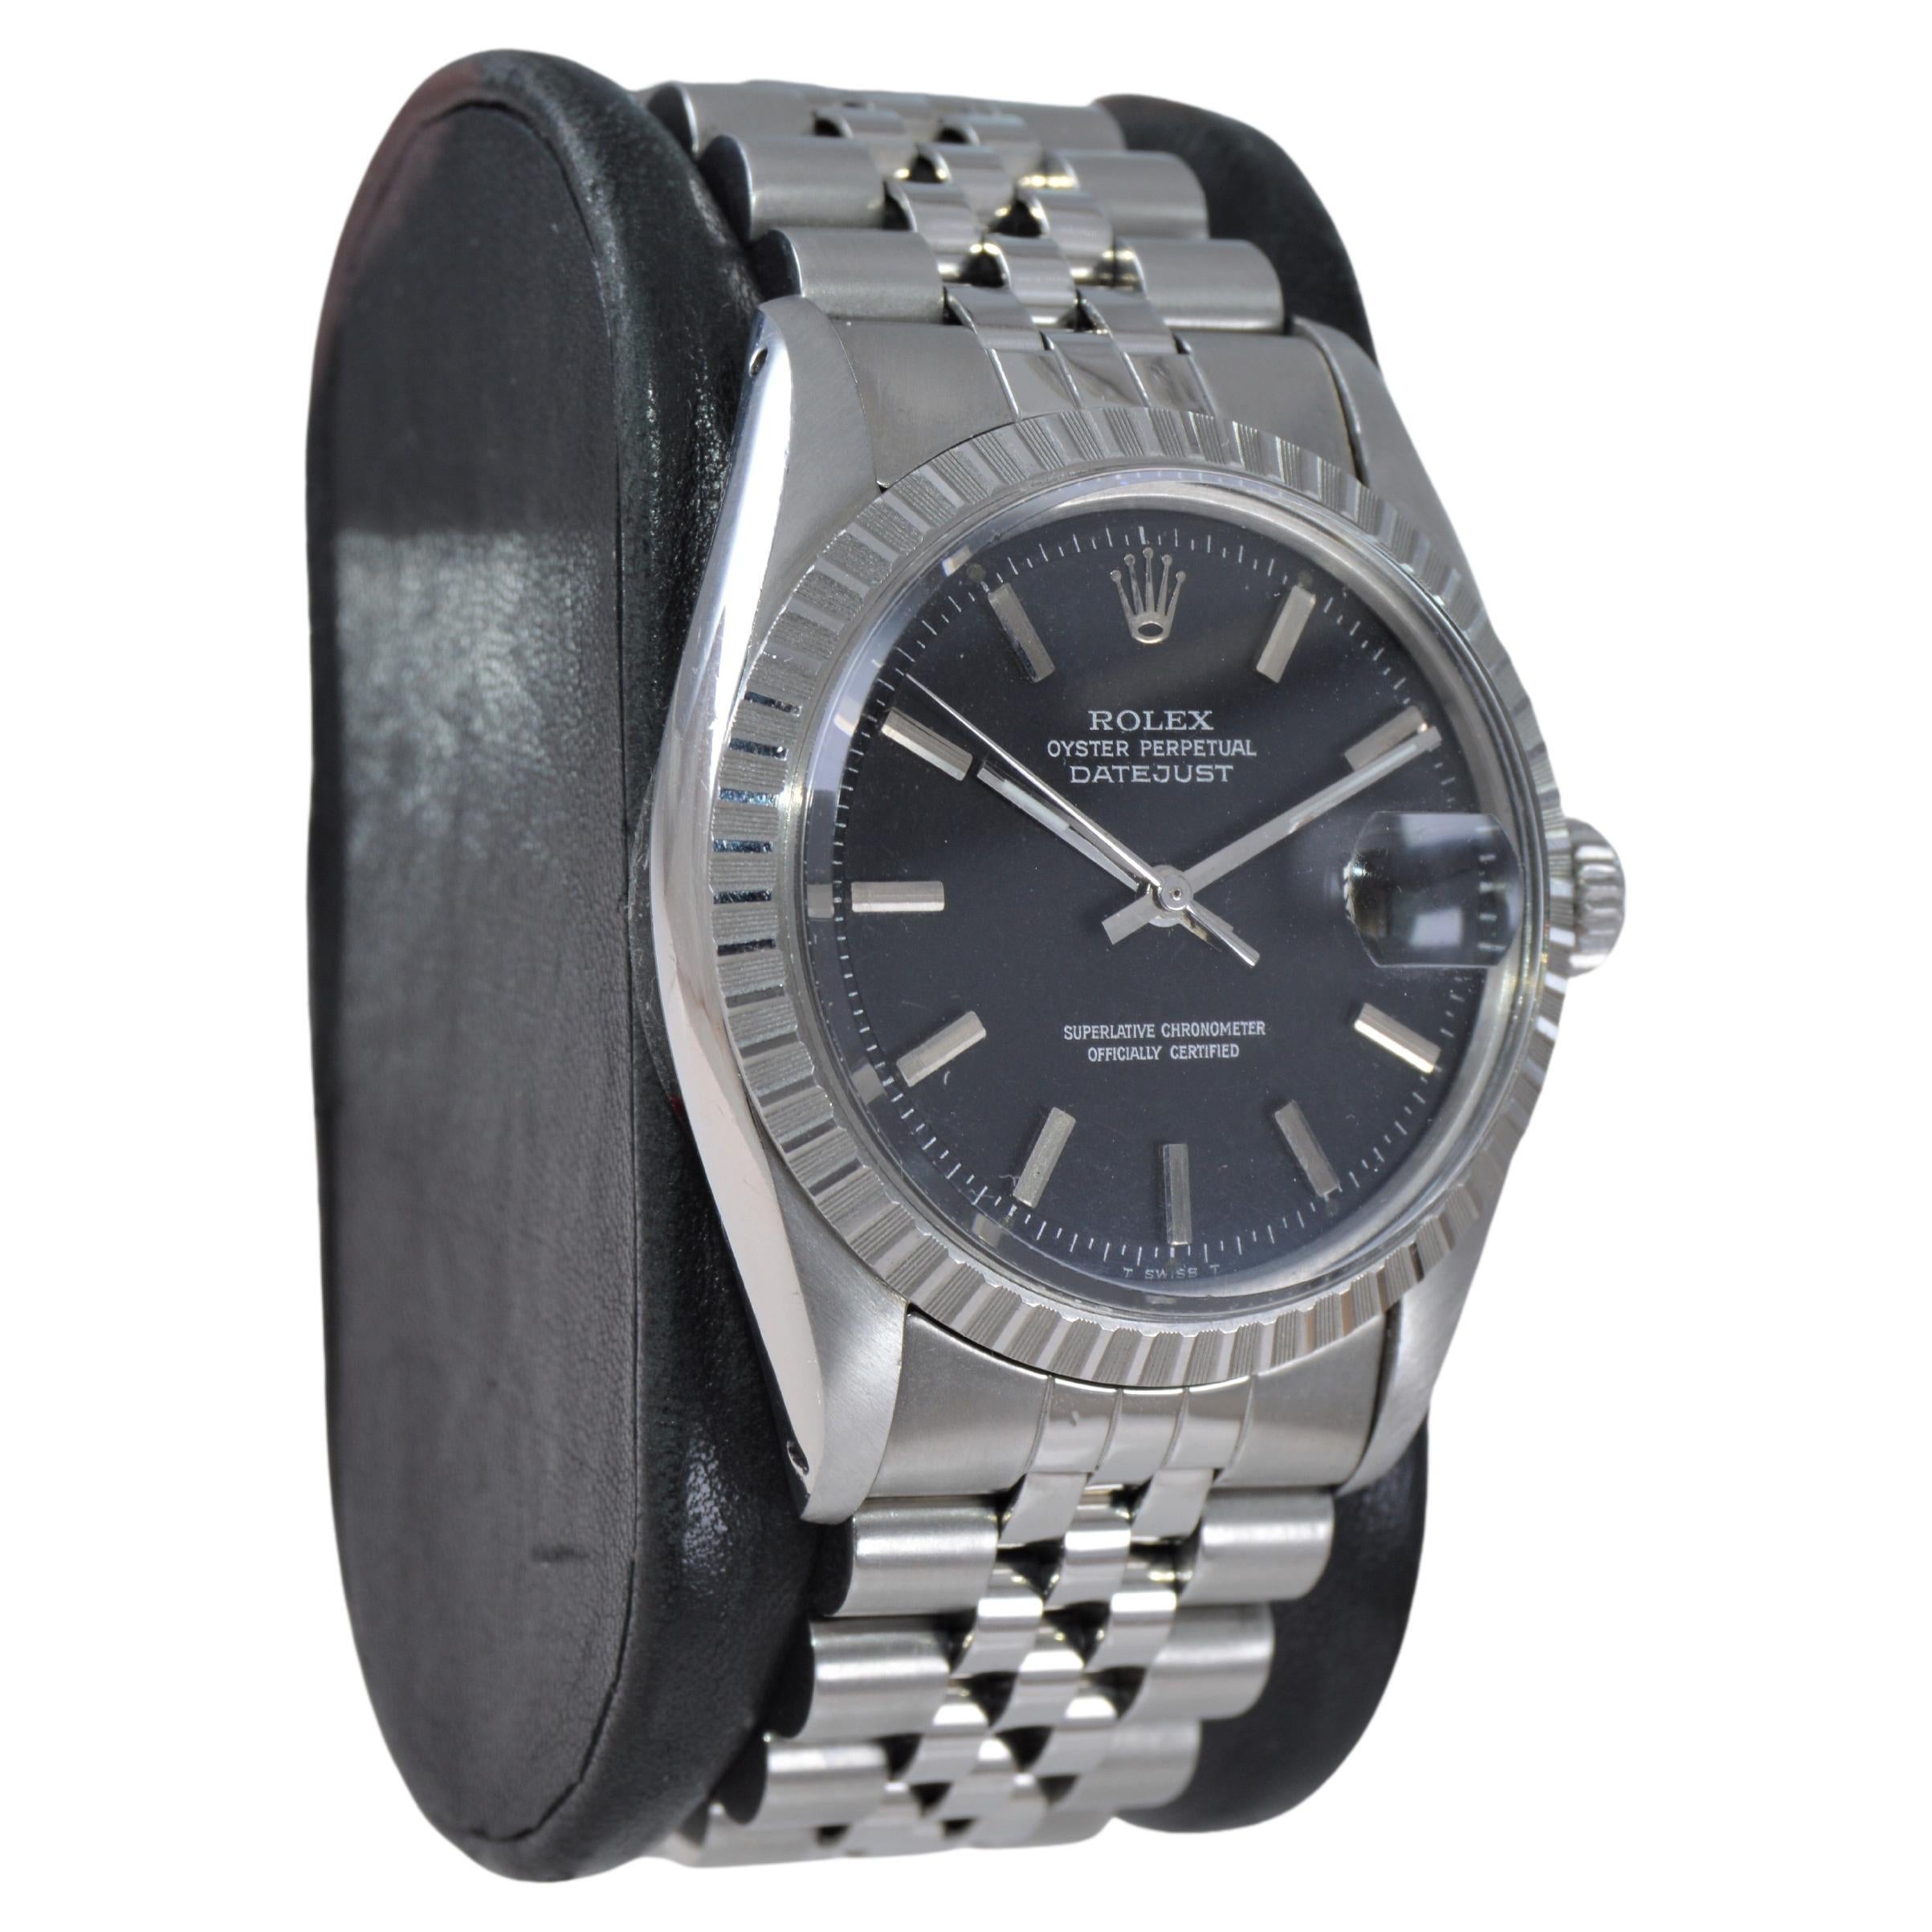 FACTORY / HOUSE: Rolex Watch Company
STYLE / REFERENCE: Oyster Perpetual Datejust / Reference 1601
METAL / MATERIAL: Stainless Steel
CIRCA / YEAR: 1970's
DIMENSIONS / SIZE: Length 41mm x Diameter 36mm
MOVEMENT / CALIBER: Perpetual Winding / 26